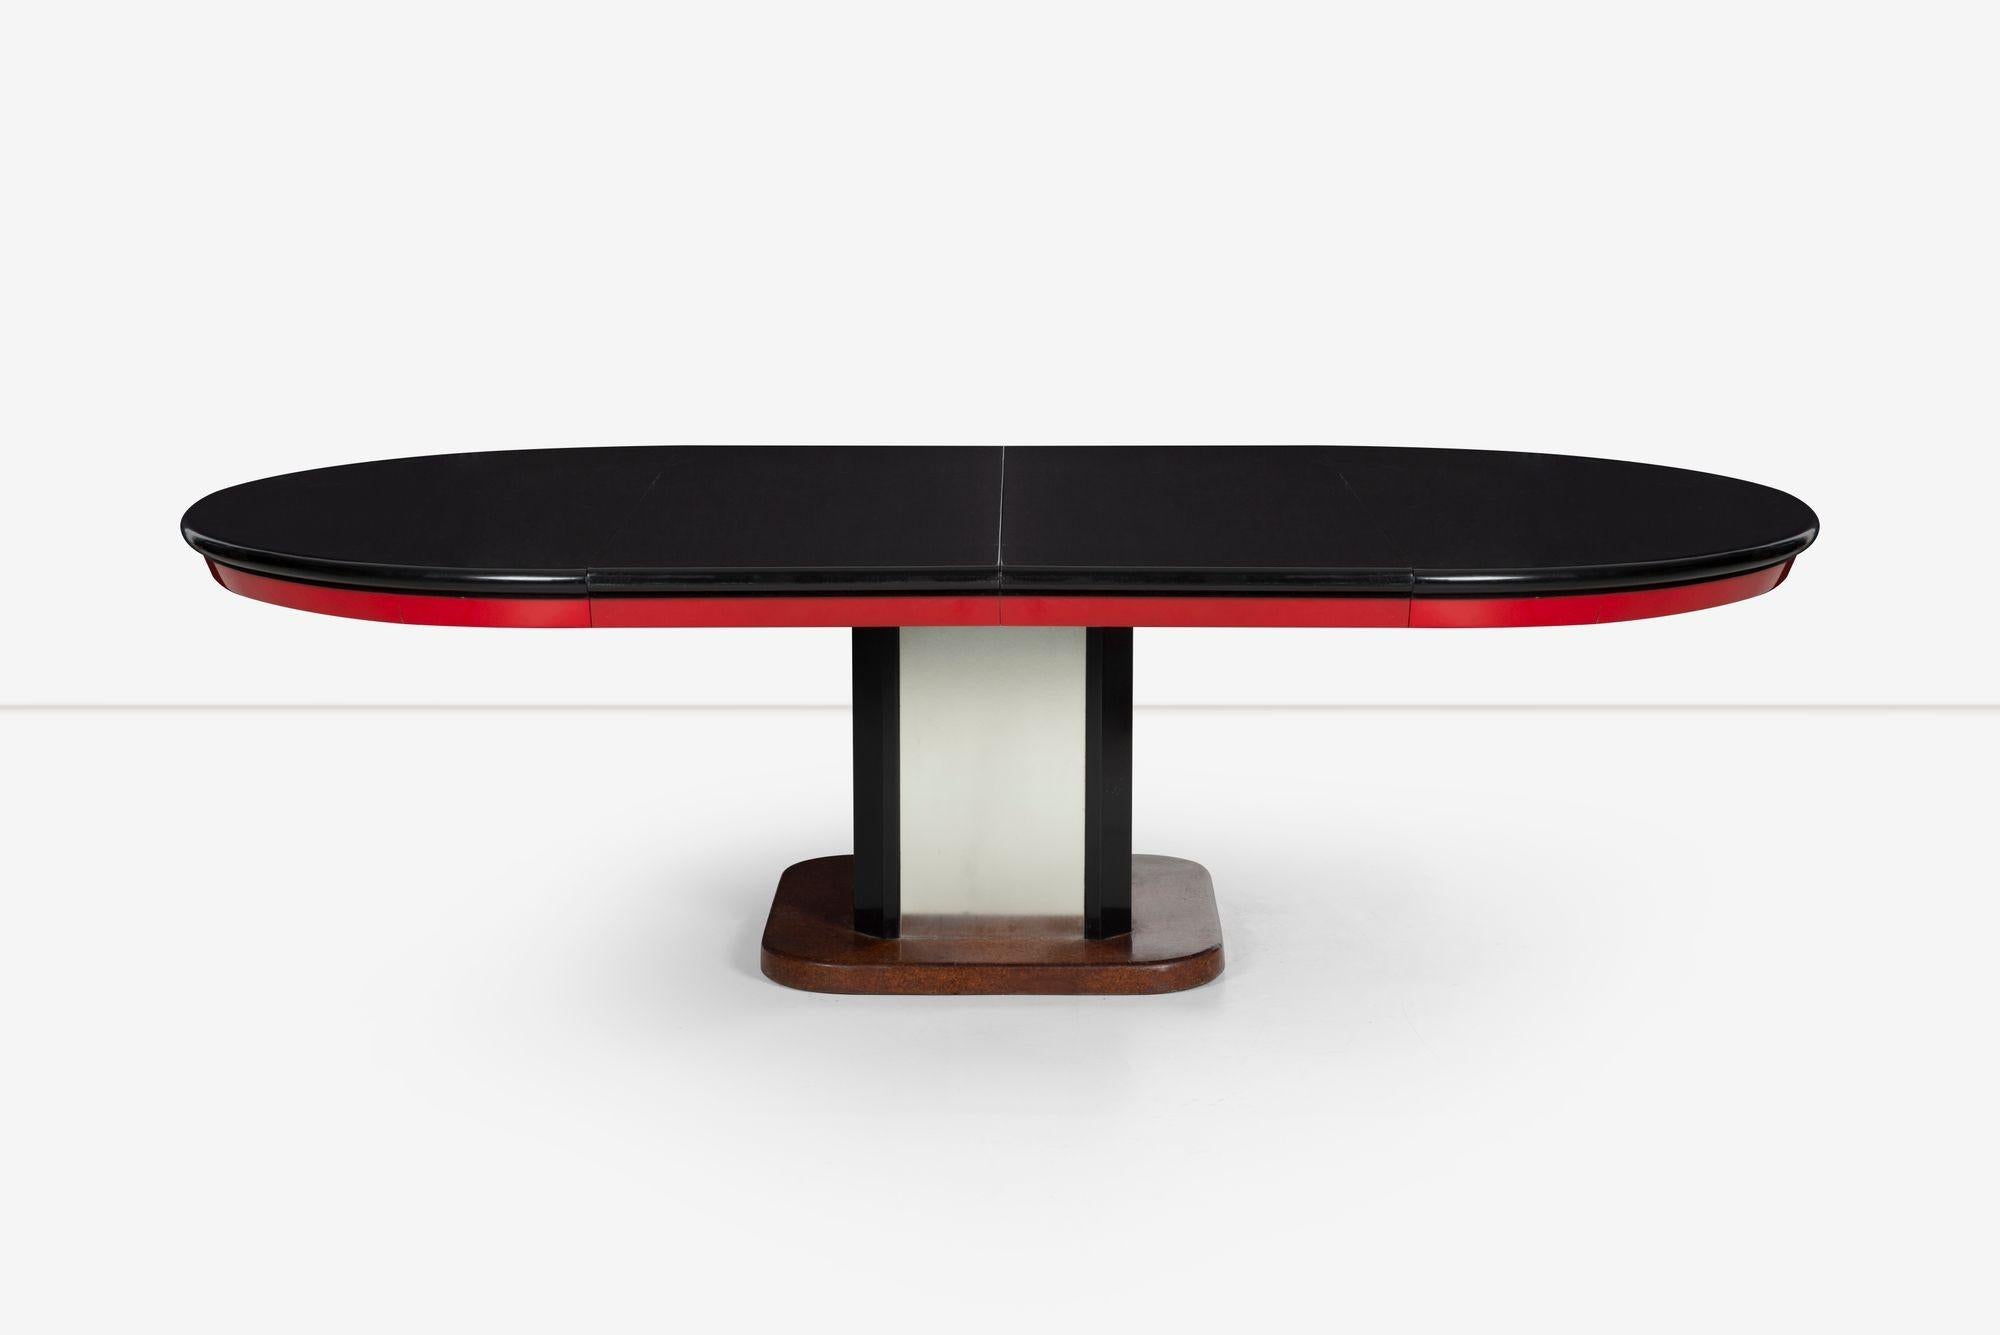 Paul Frankl custom dining table, designed for a project in La Jolla, California 1930c.
Sold with two 24-inch leaves when both are inserted the table measures 108 inches fully extended, comfortably seating 10 to 12.
Lacquered wood and cork base,